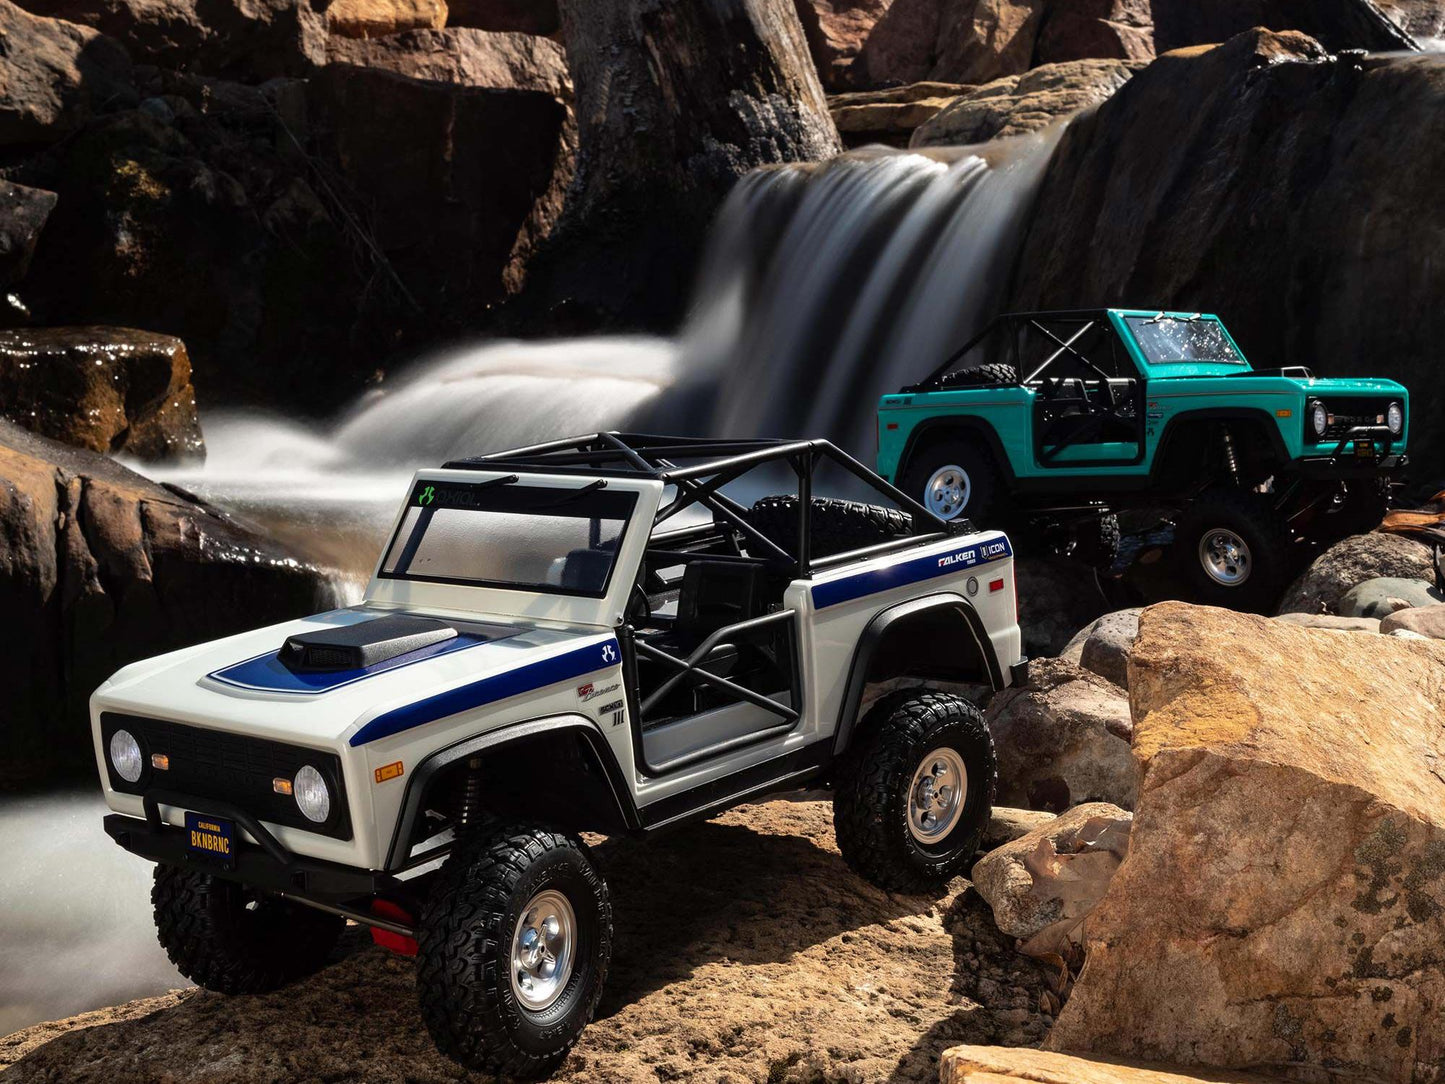 AXIAL 1/10 SCX10III Early Ford Bronco 4WD RTR, Teal AXI03014BT1  White AXI03014BT2 (shadow stock)